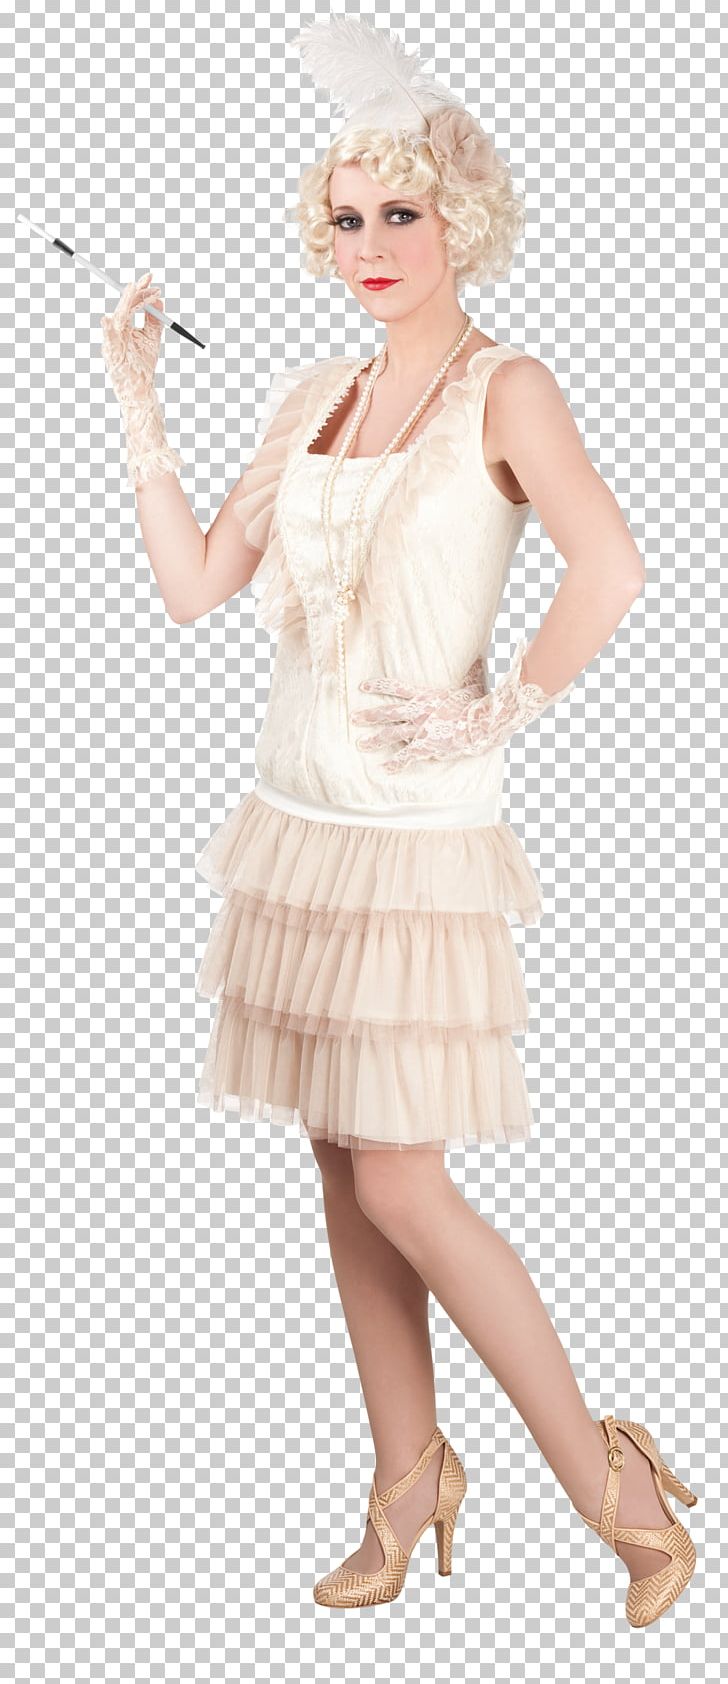 1920s Dress Costume Clothing Années Folles PNG, Clipart, 1920s, Annees Folles, Avengers Chici, Ball, Beslistnl Free PNG Download